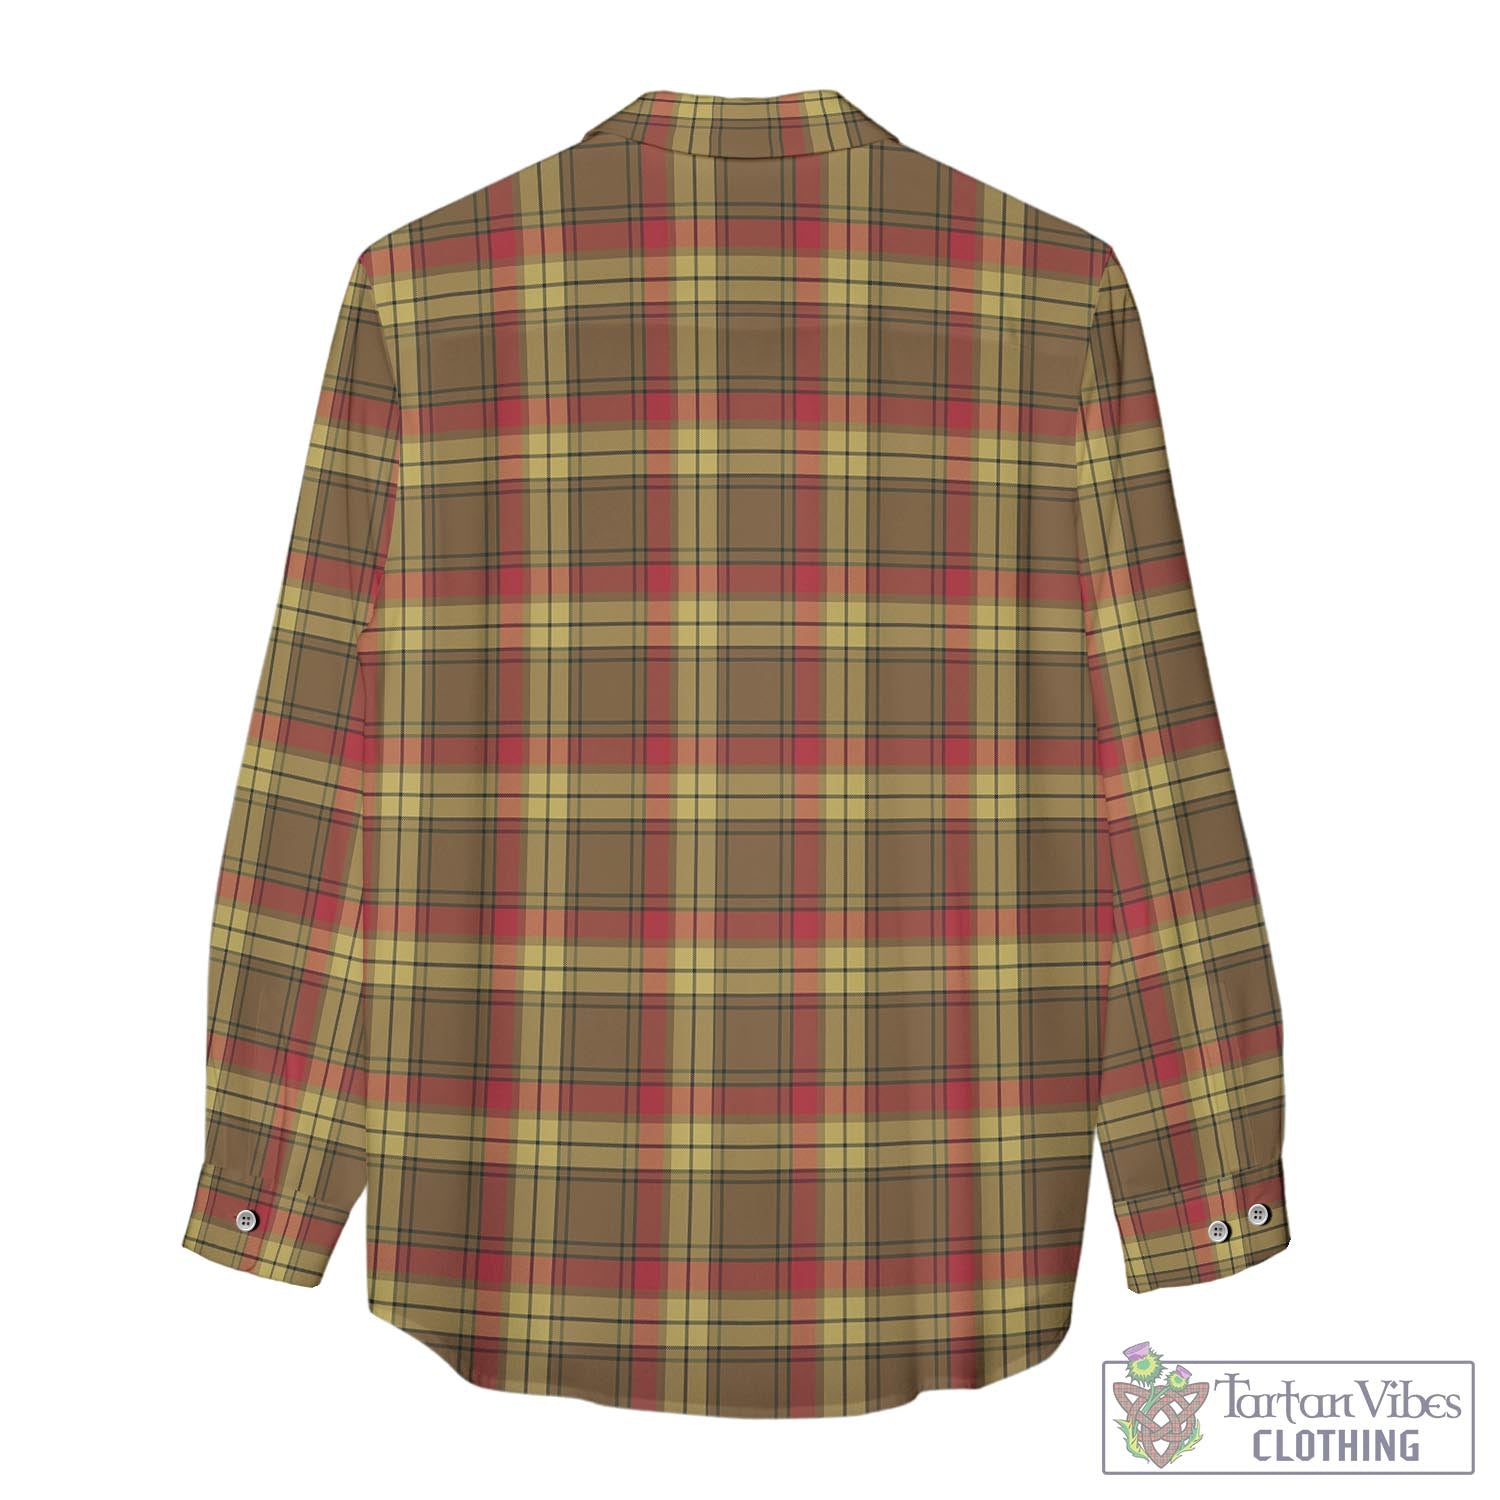 Tartan Vibes Clothing MacMillan Old Weathered Tartan Womens Casual Shirt with Family Crest